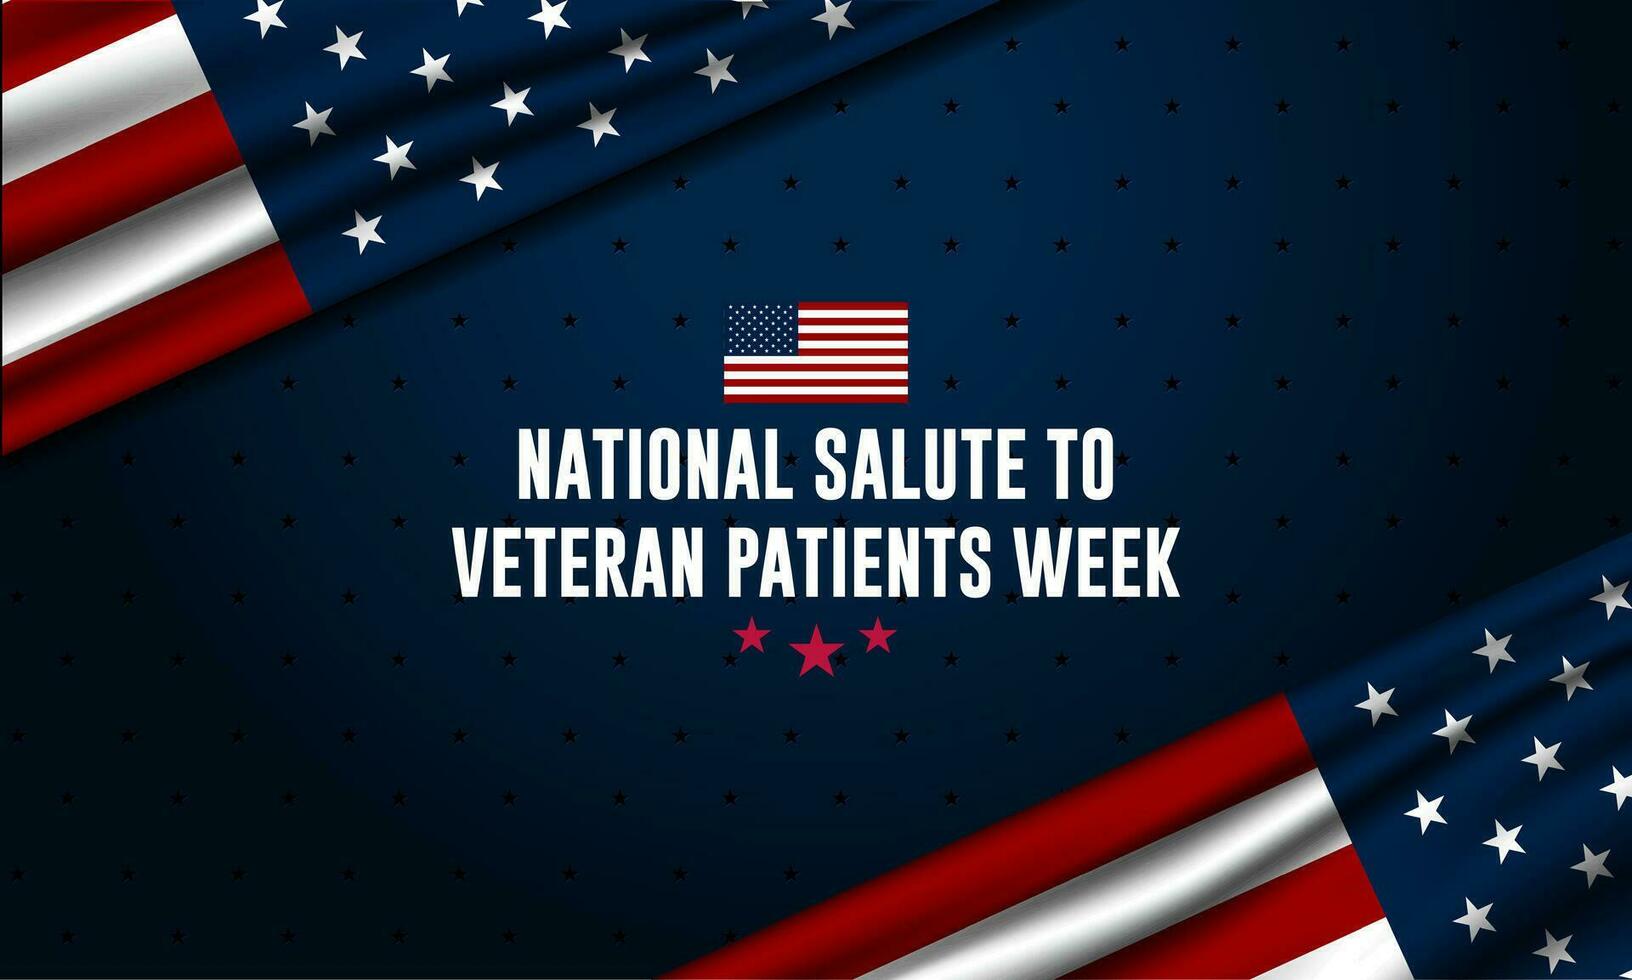 National Salute To Veteran Patients Week Background Vector Illustration